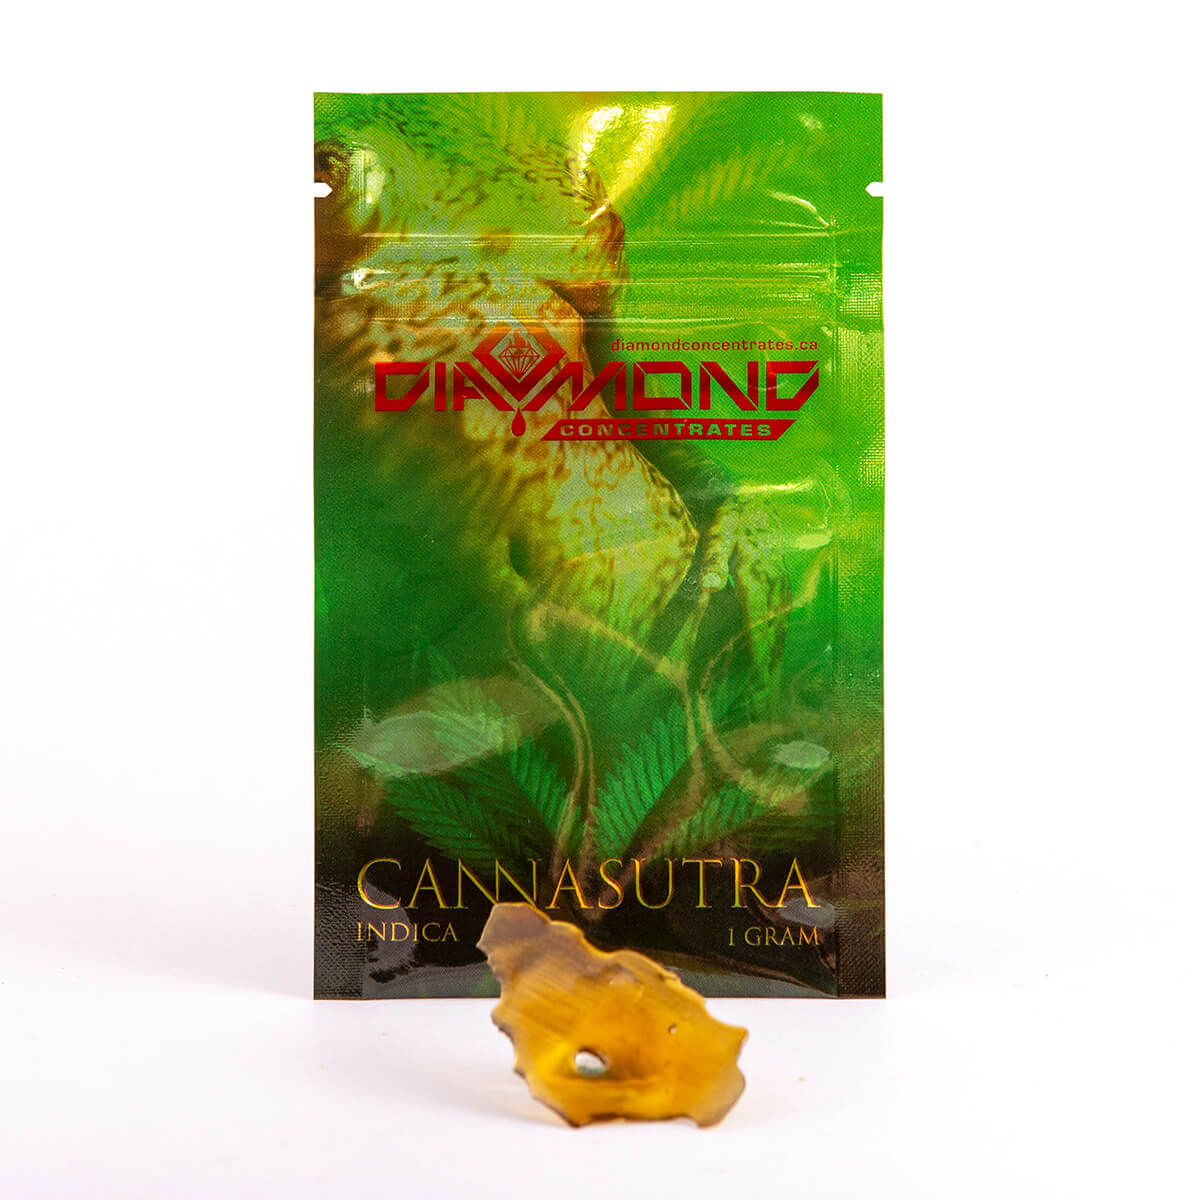 Cannasutra Shatter by Diamond Concentrates